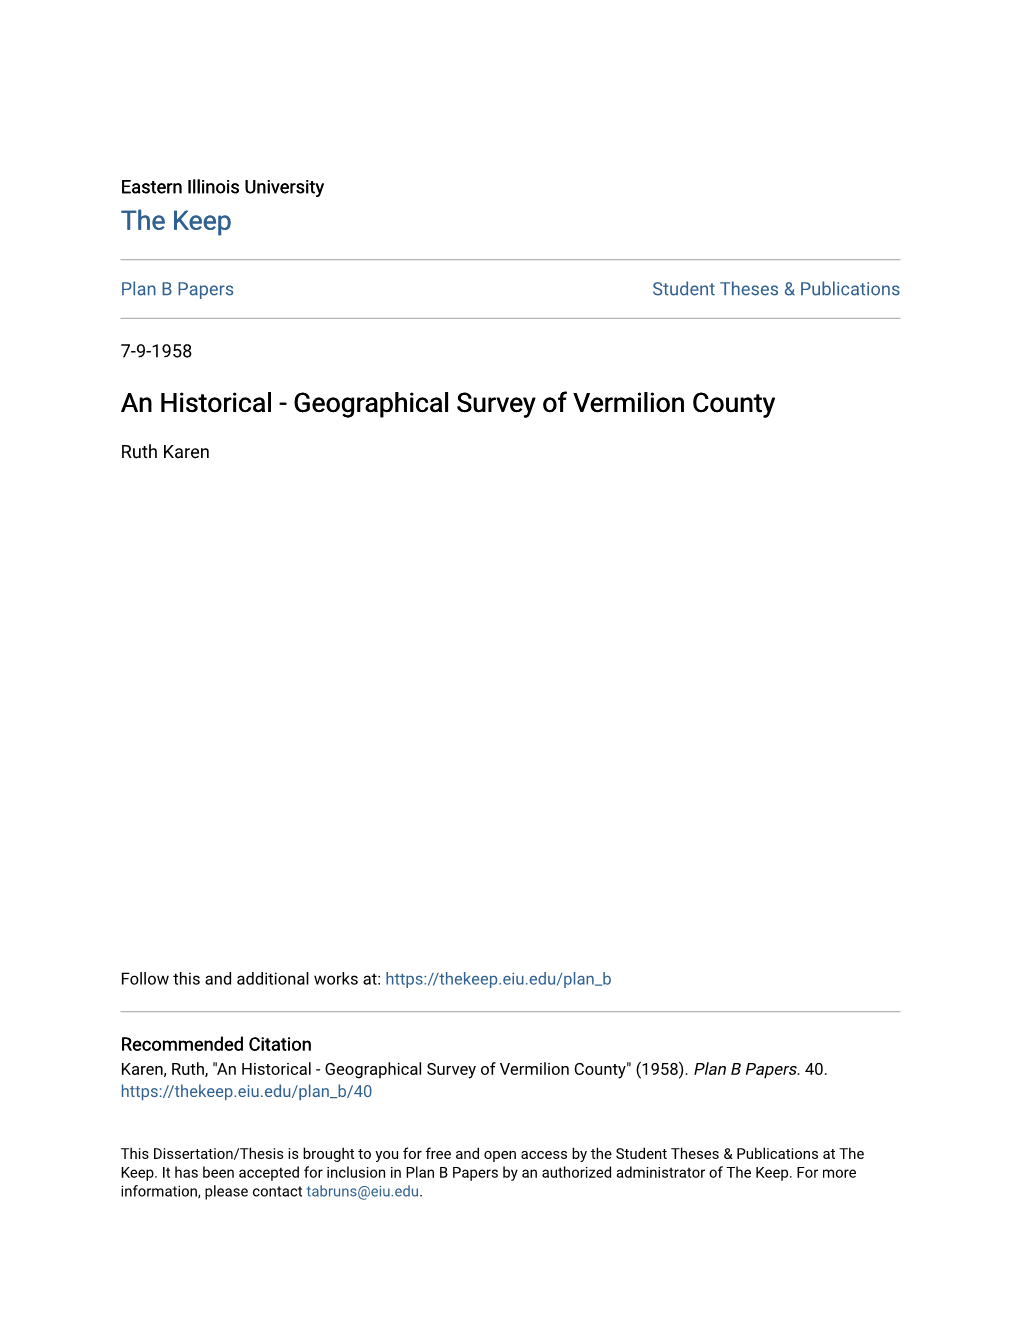 An Historical - Geographical Survey of Vermilion County